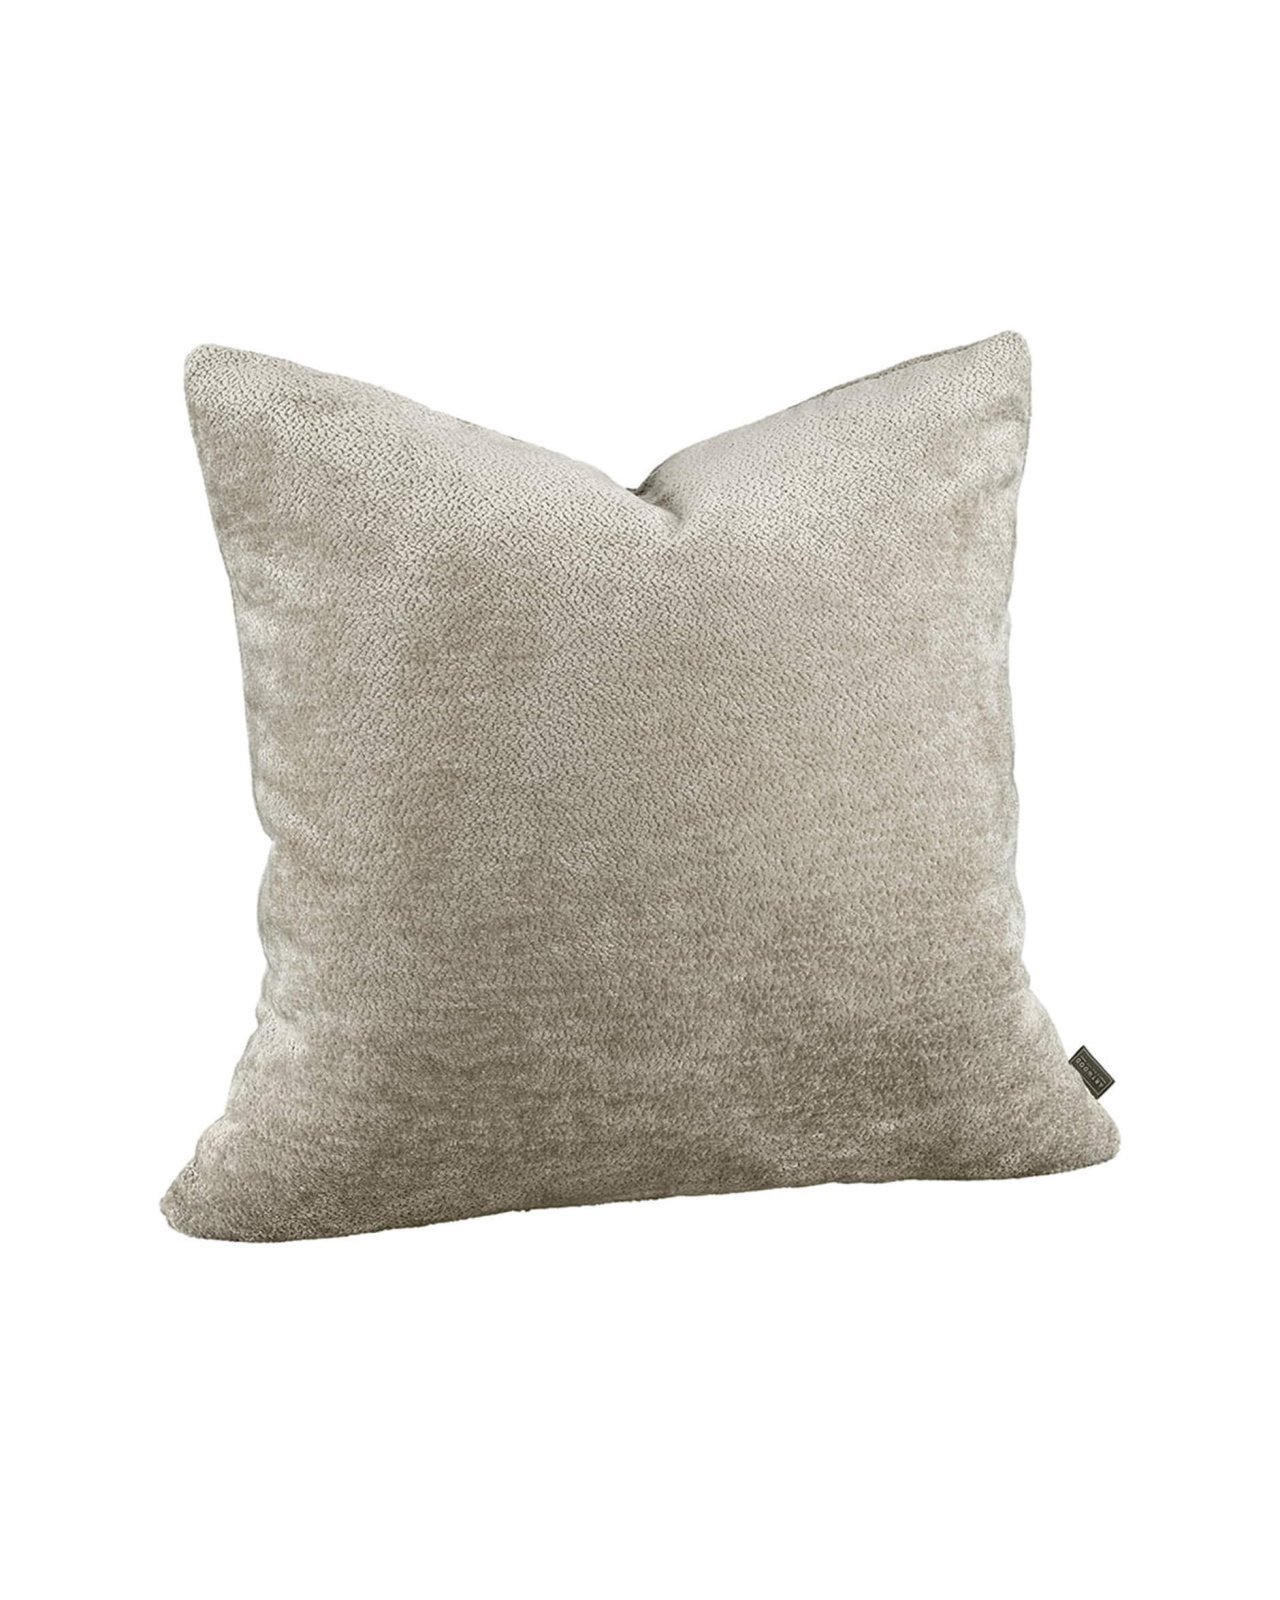 Mare Cushion Cover Sand